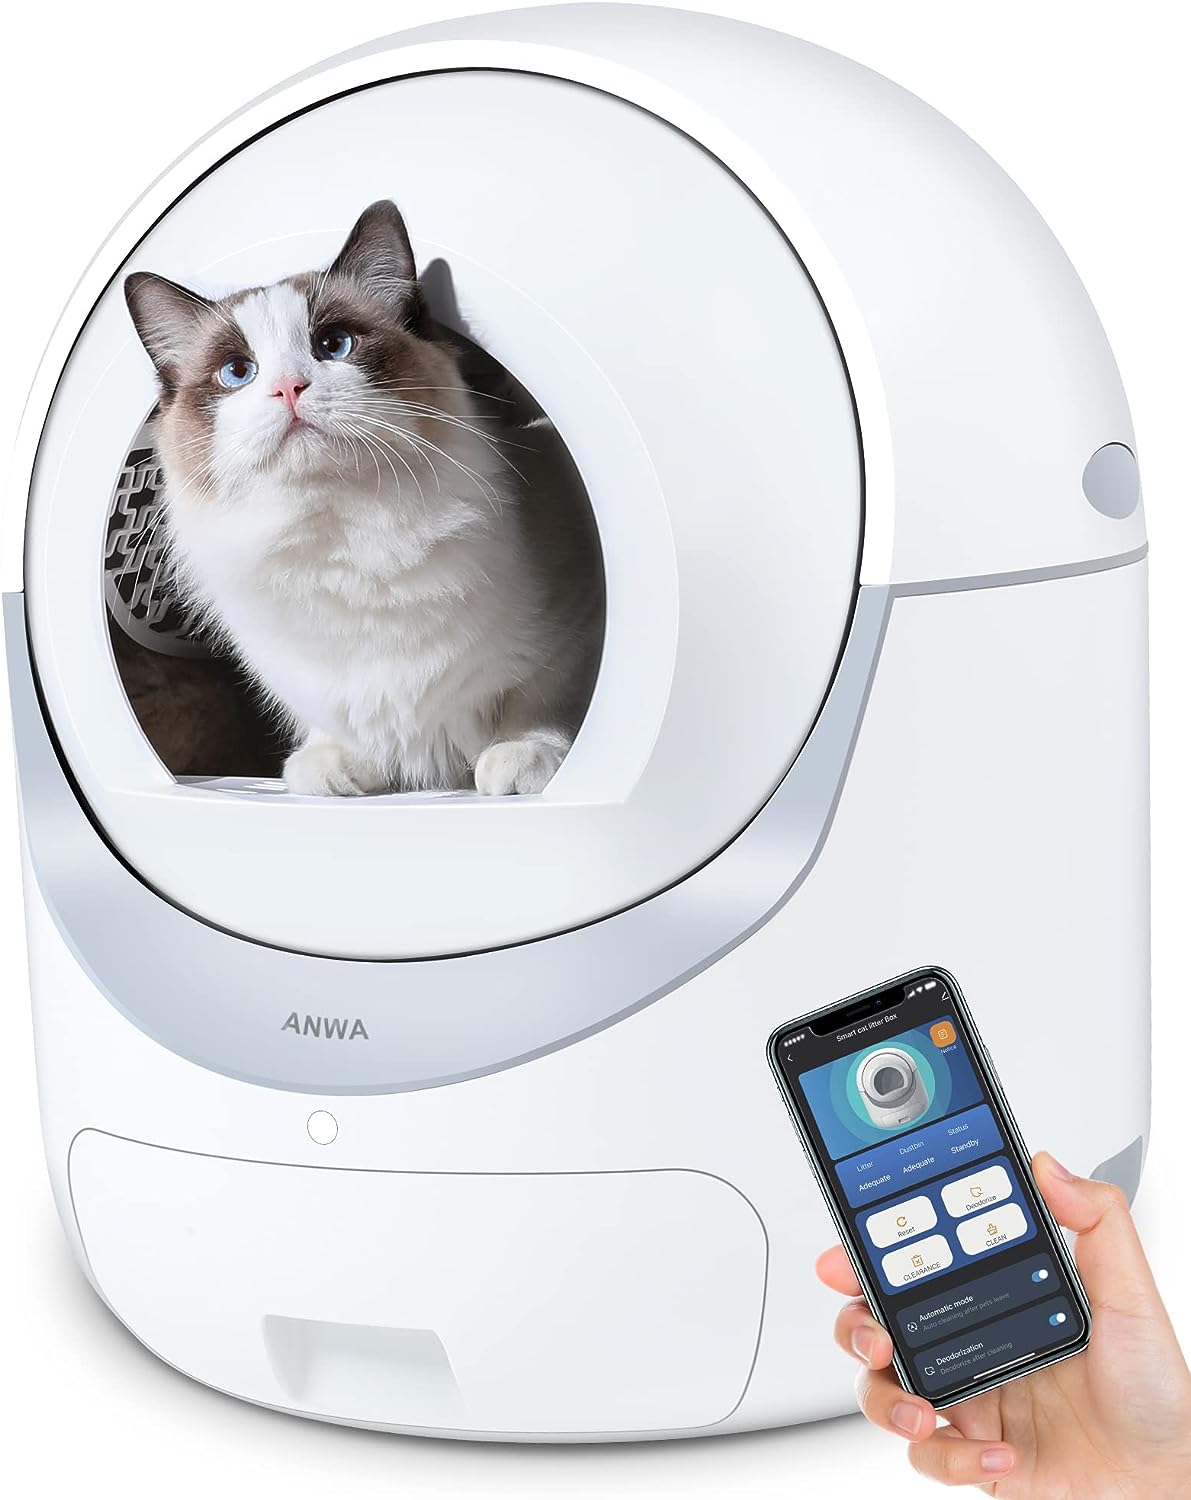 ANWA Automatic Cat Litter Box Self Cleaning Review